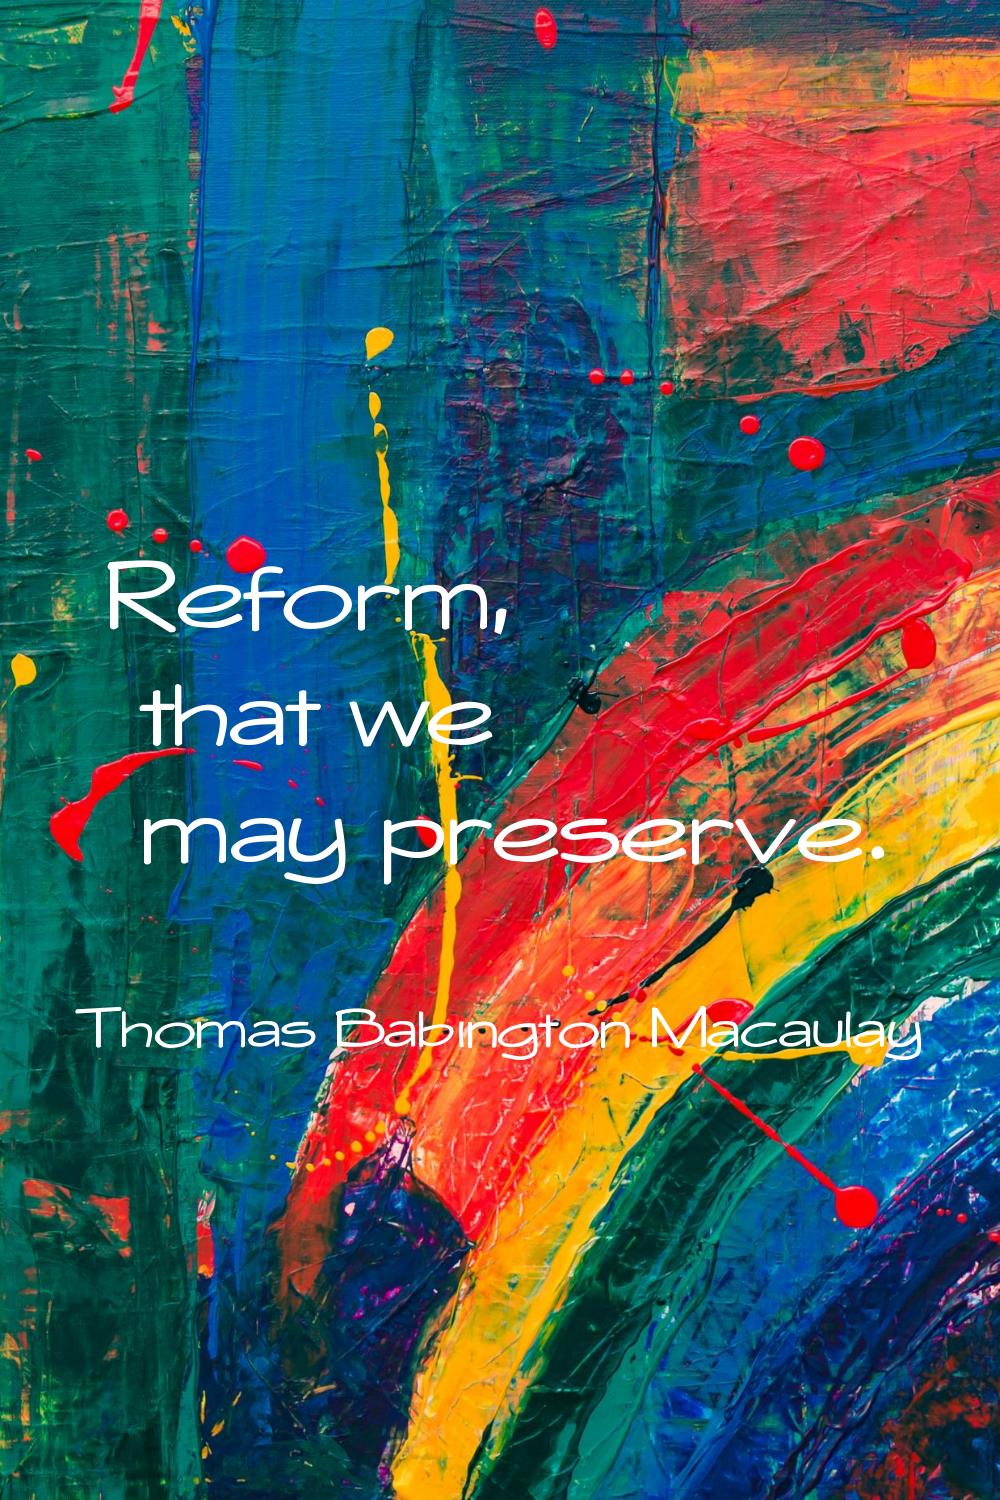 Reform, that we may preserve.